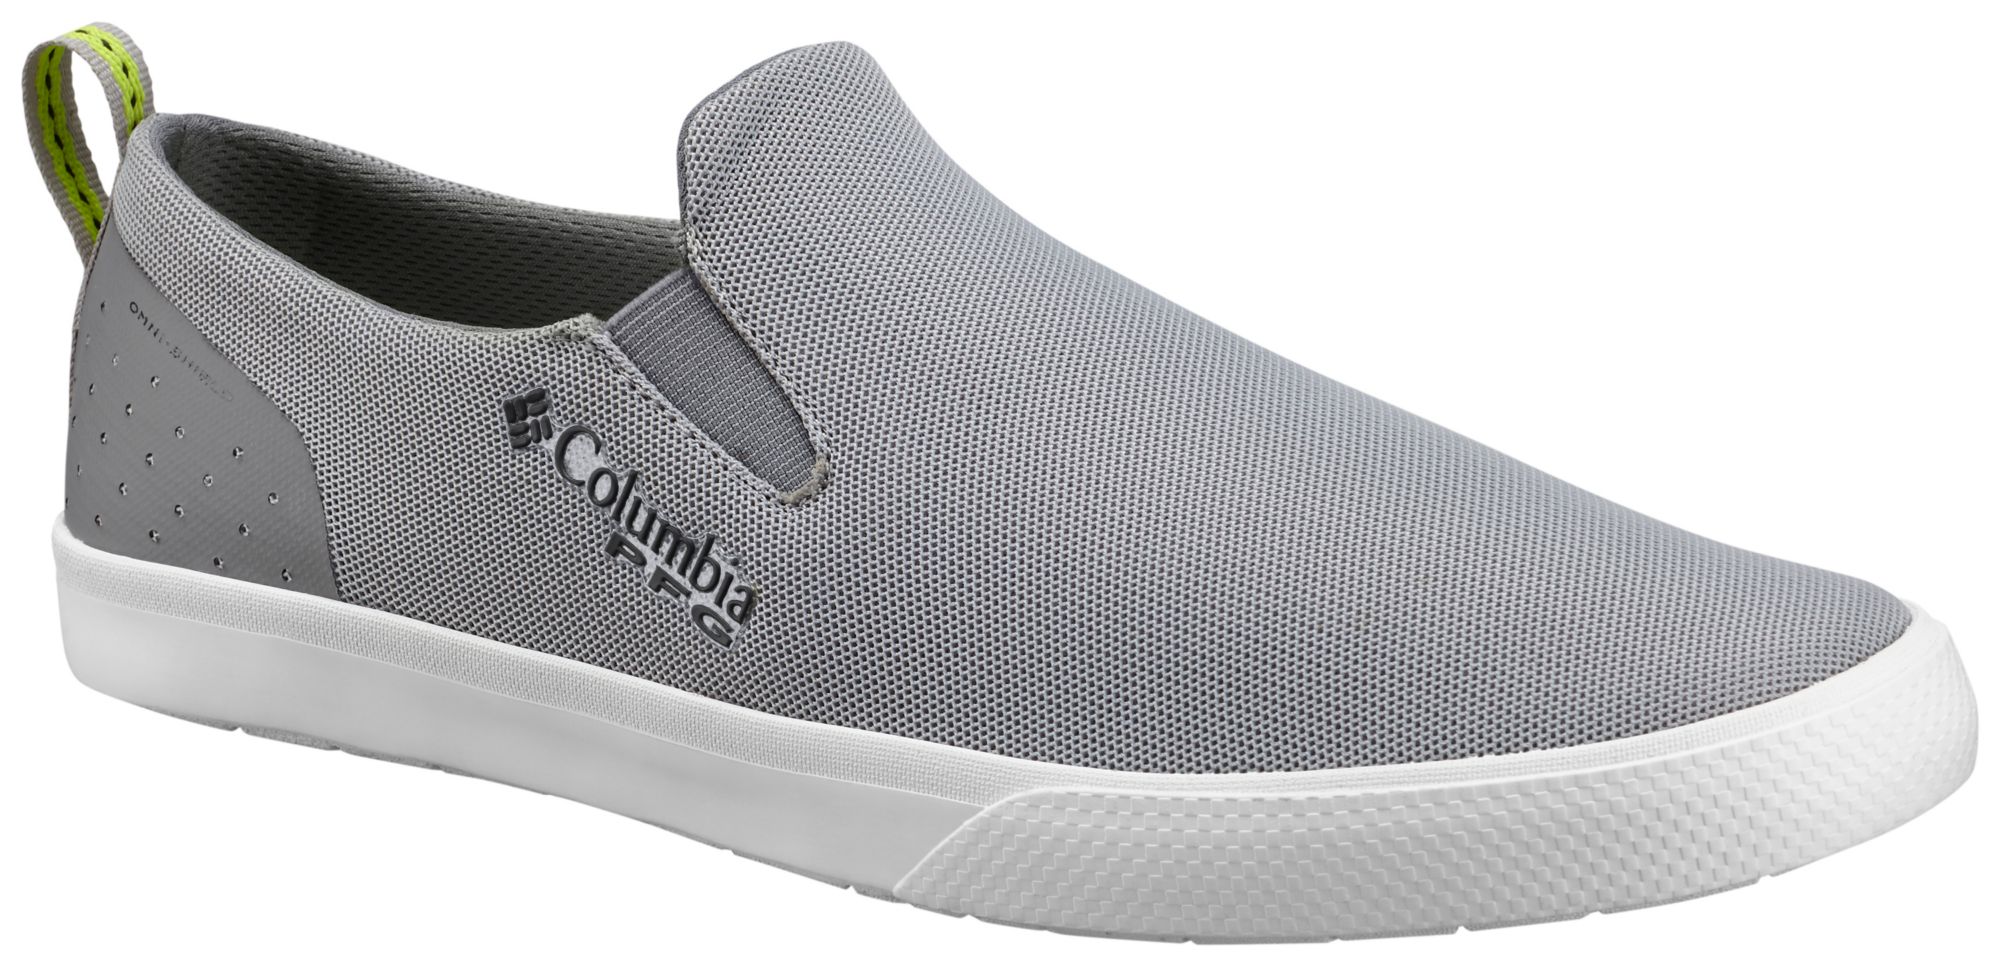 mens columbia slip on shoes